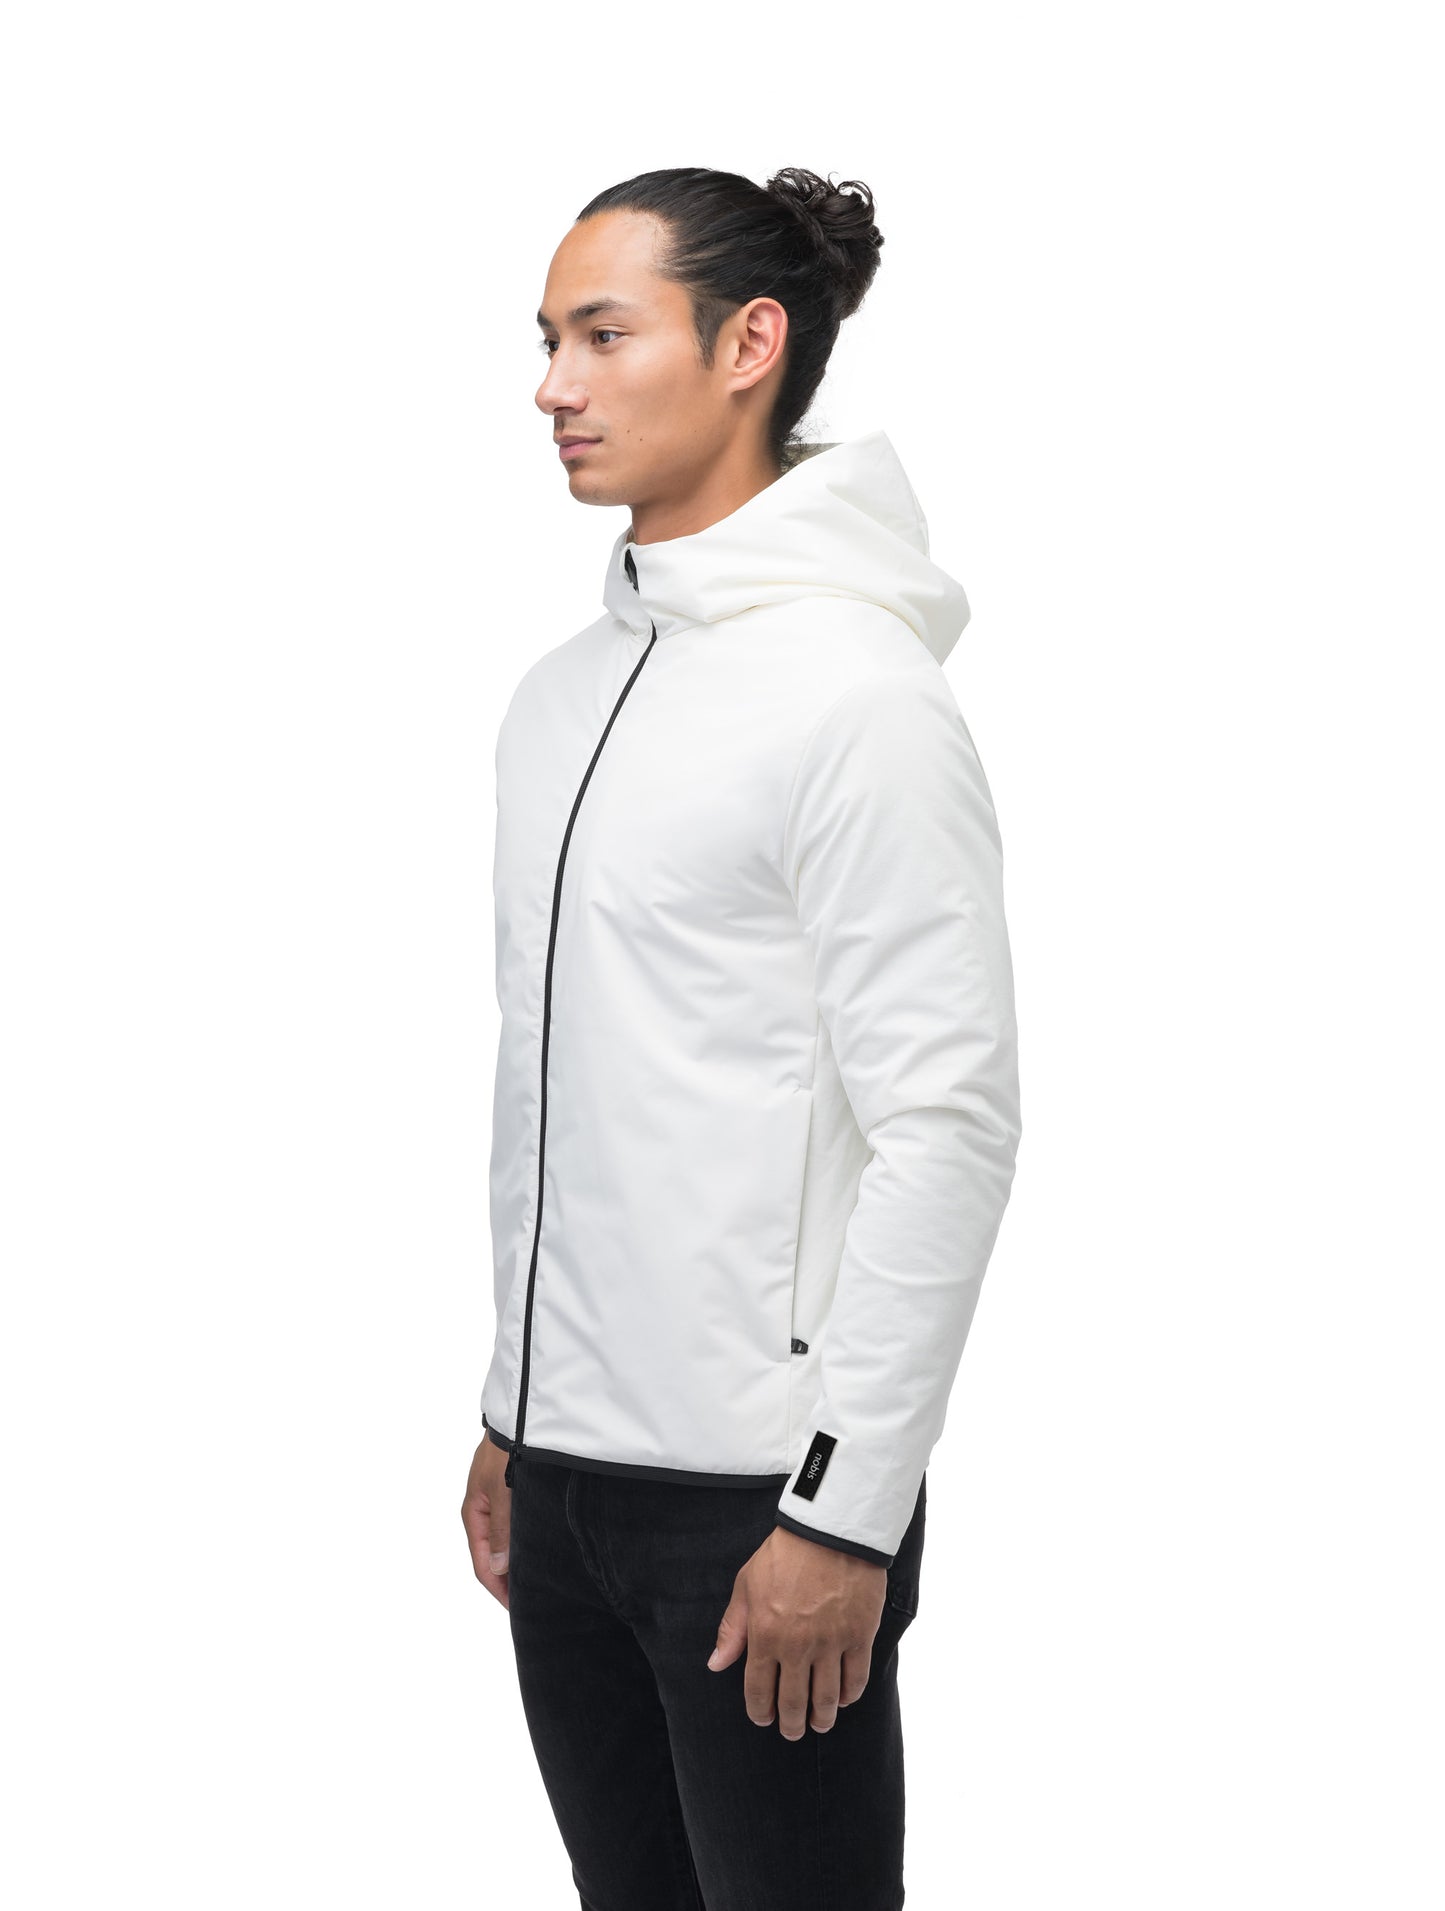 Men's hip length mid layer jacket with non-removable hood and two-way zipper in Chalk